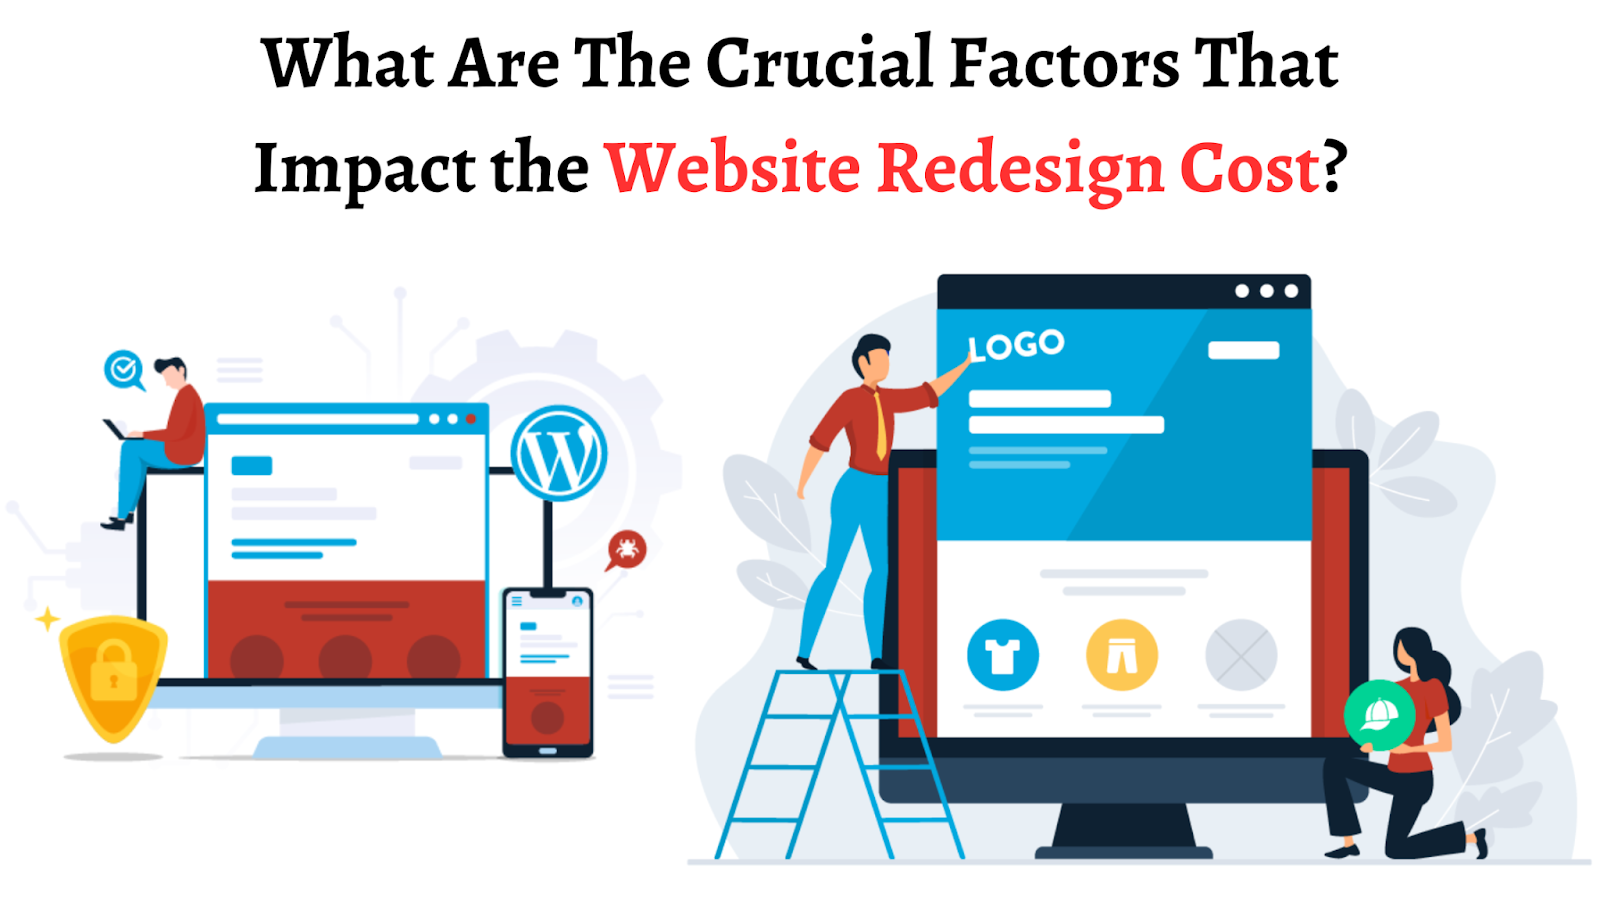 What Are The Crucial Factors That Impact the Website Redesign Cost?